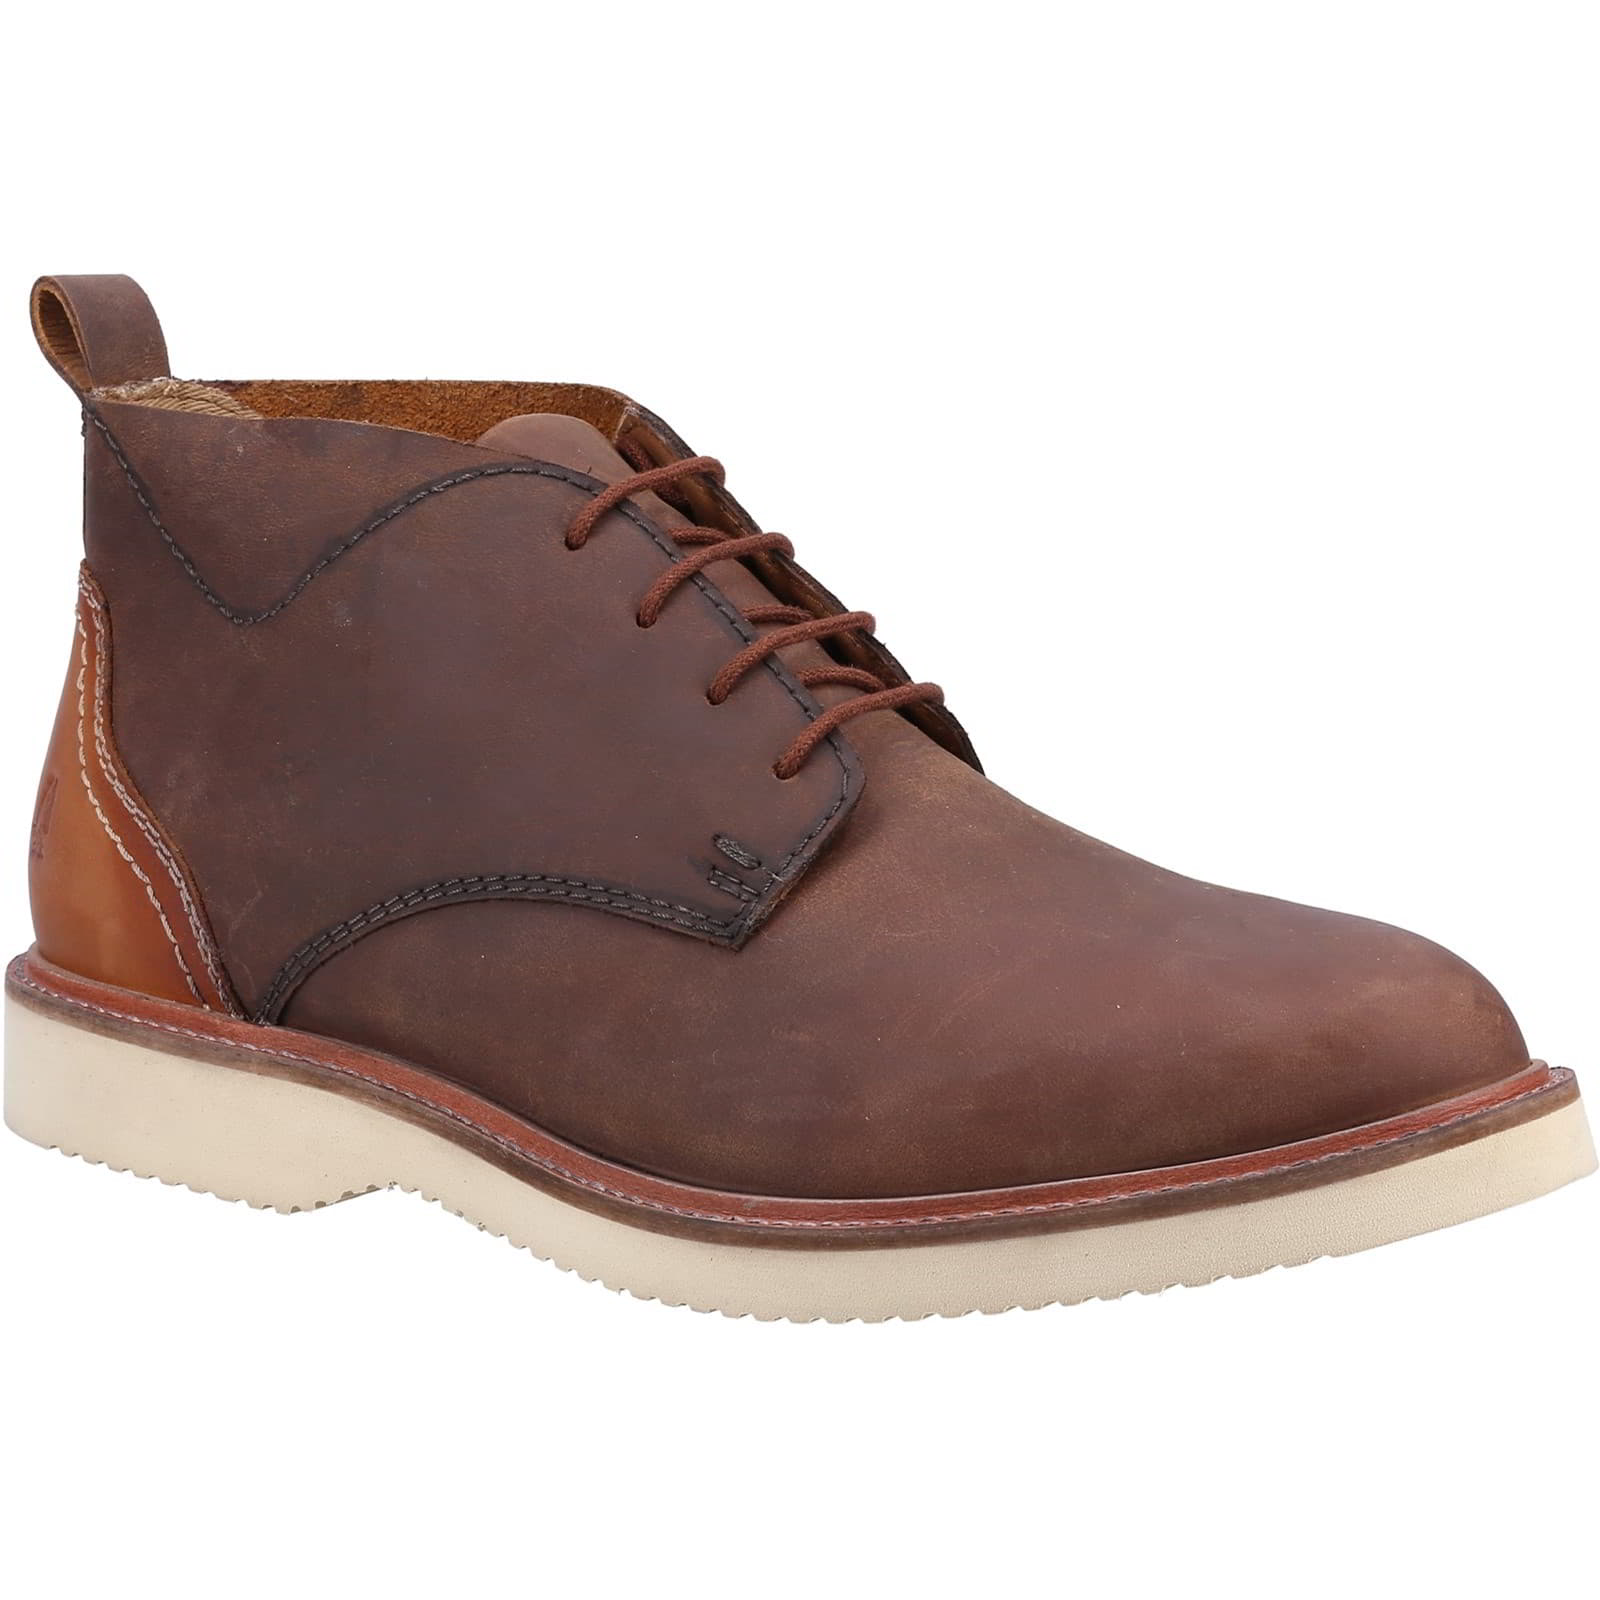 Hush Puppies Men's Wesley Lace UP Desert Chukka Ankle Boots - UK 12